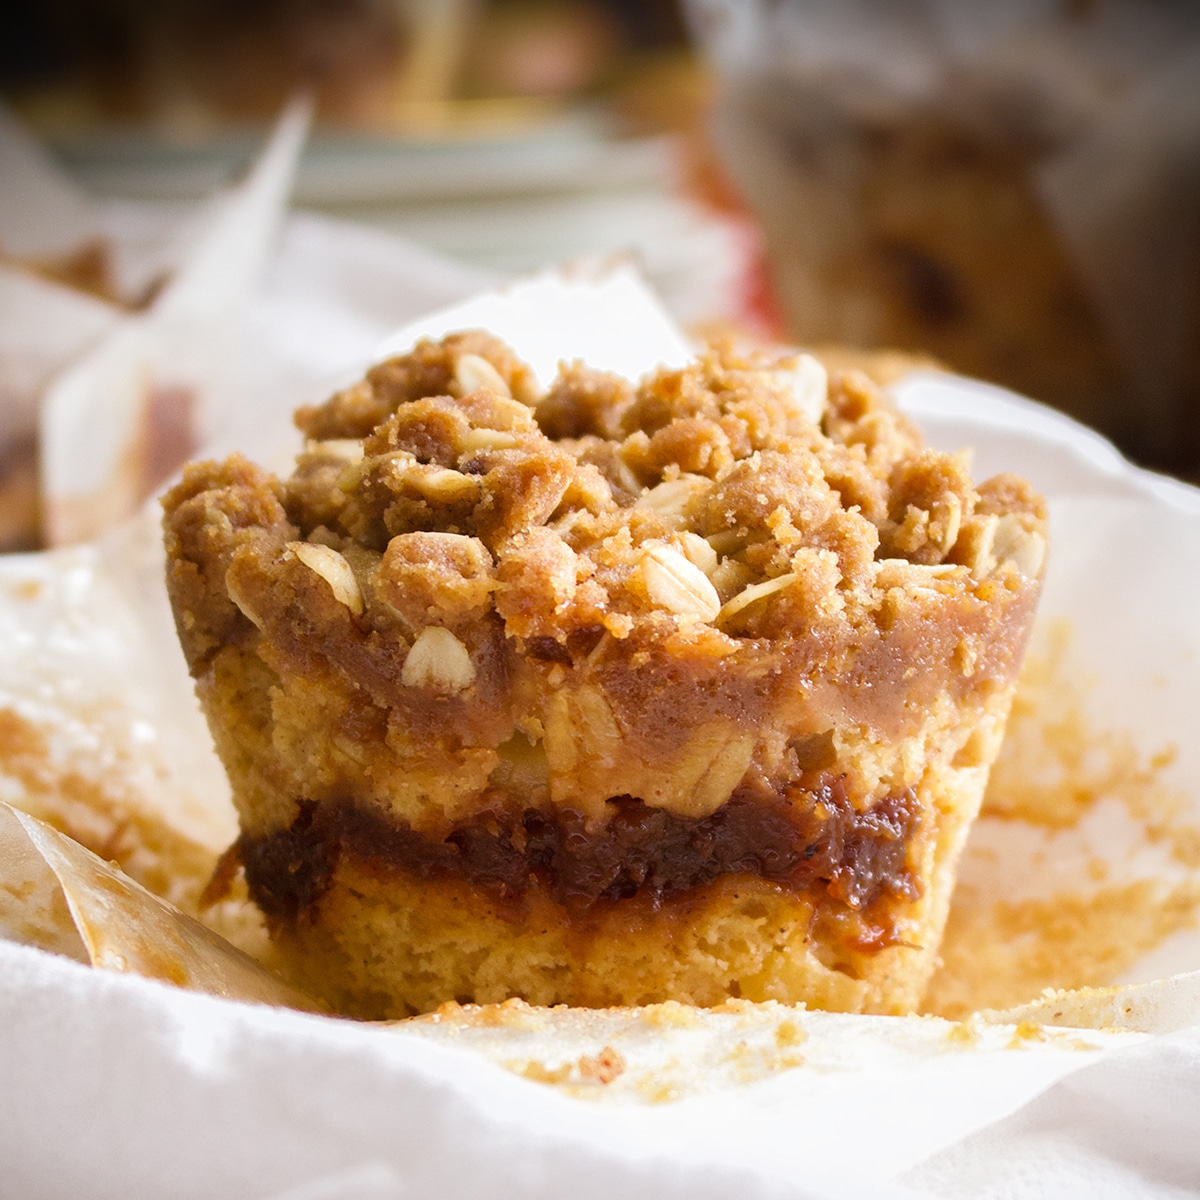 A freshly baked apple butter muffin on a white plate.